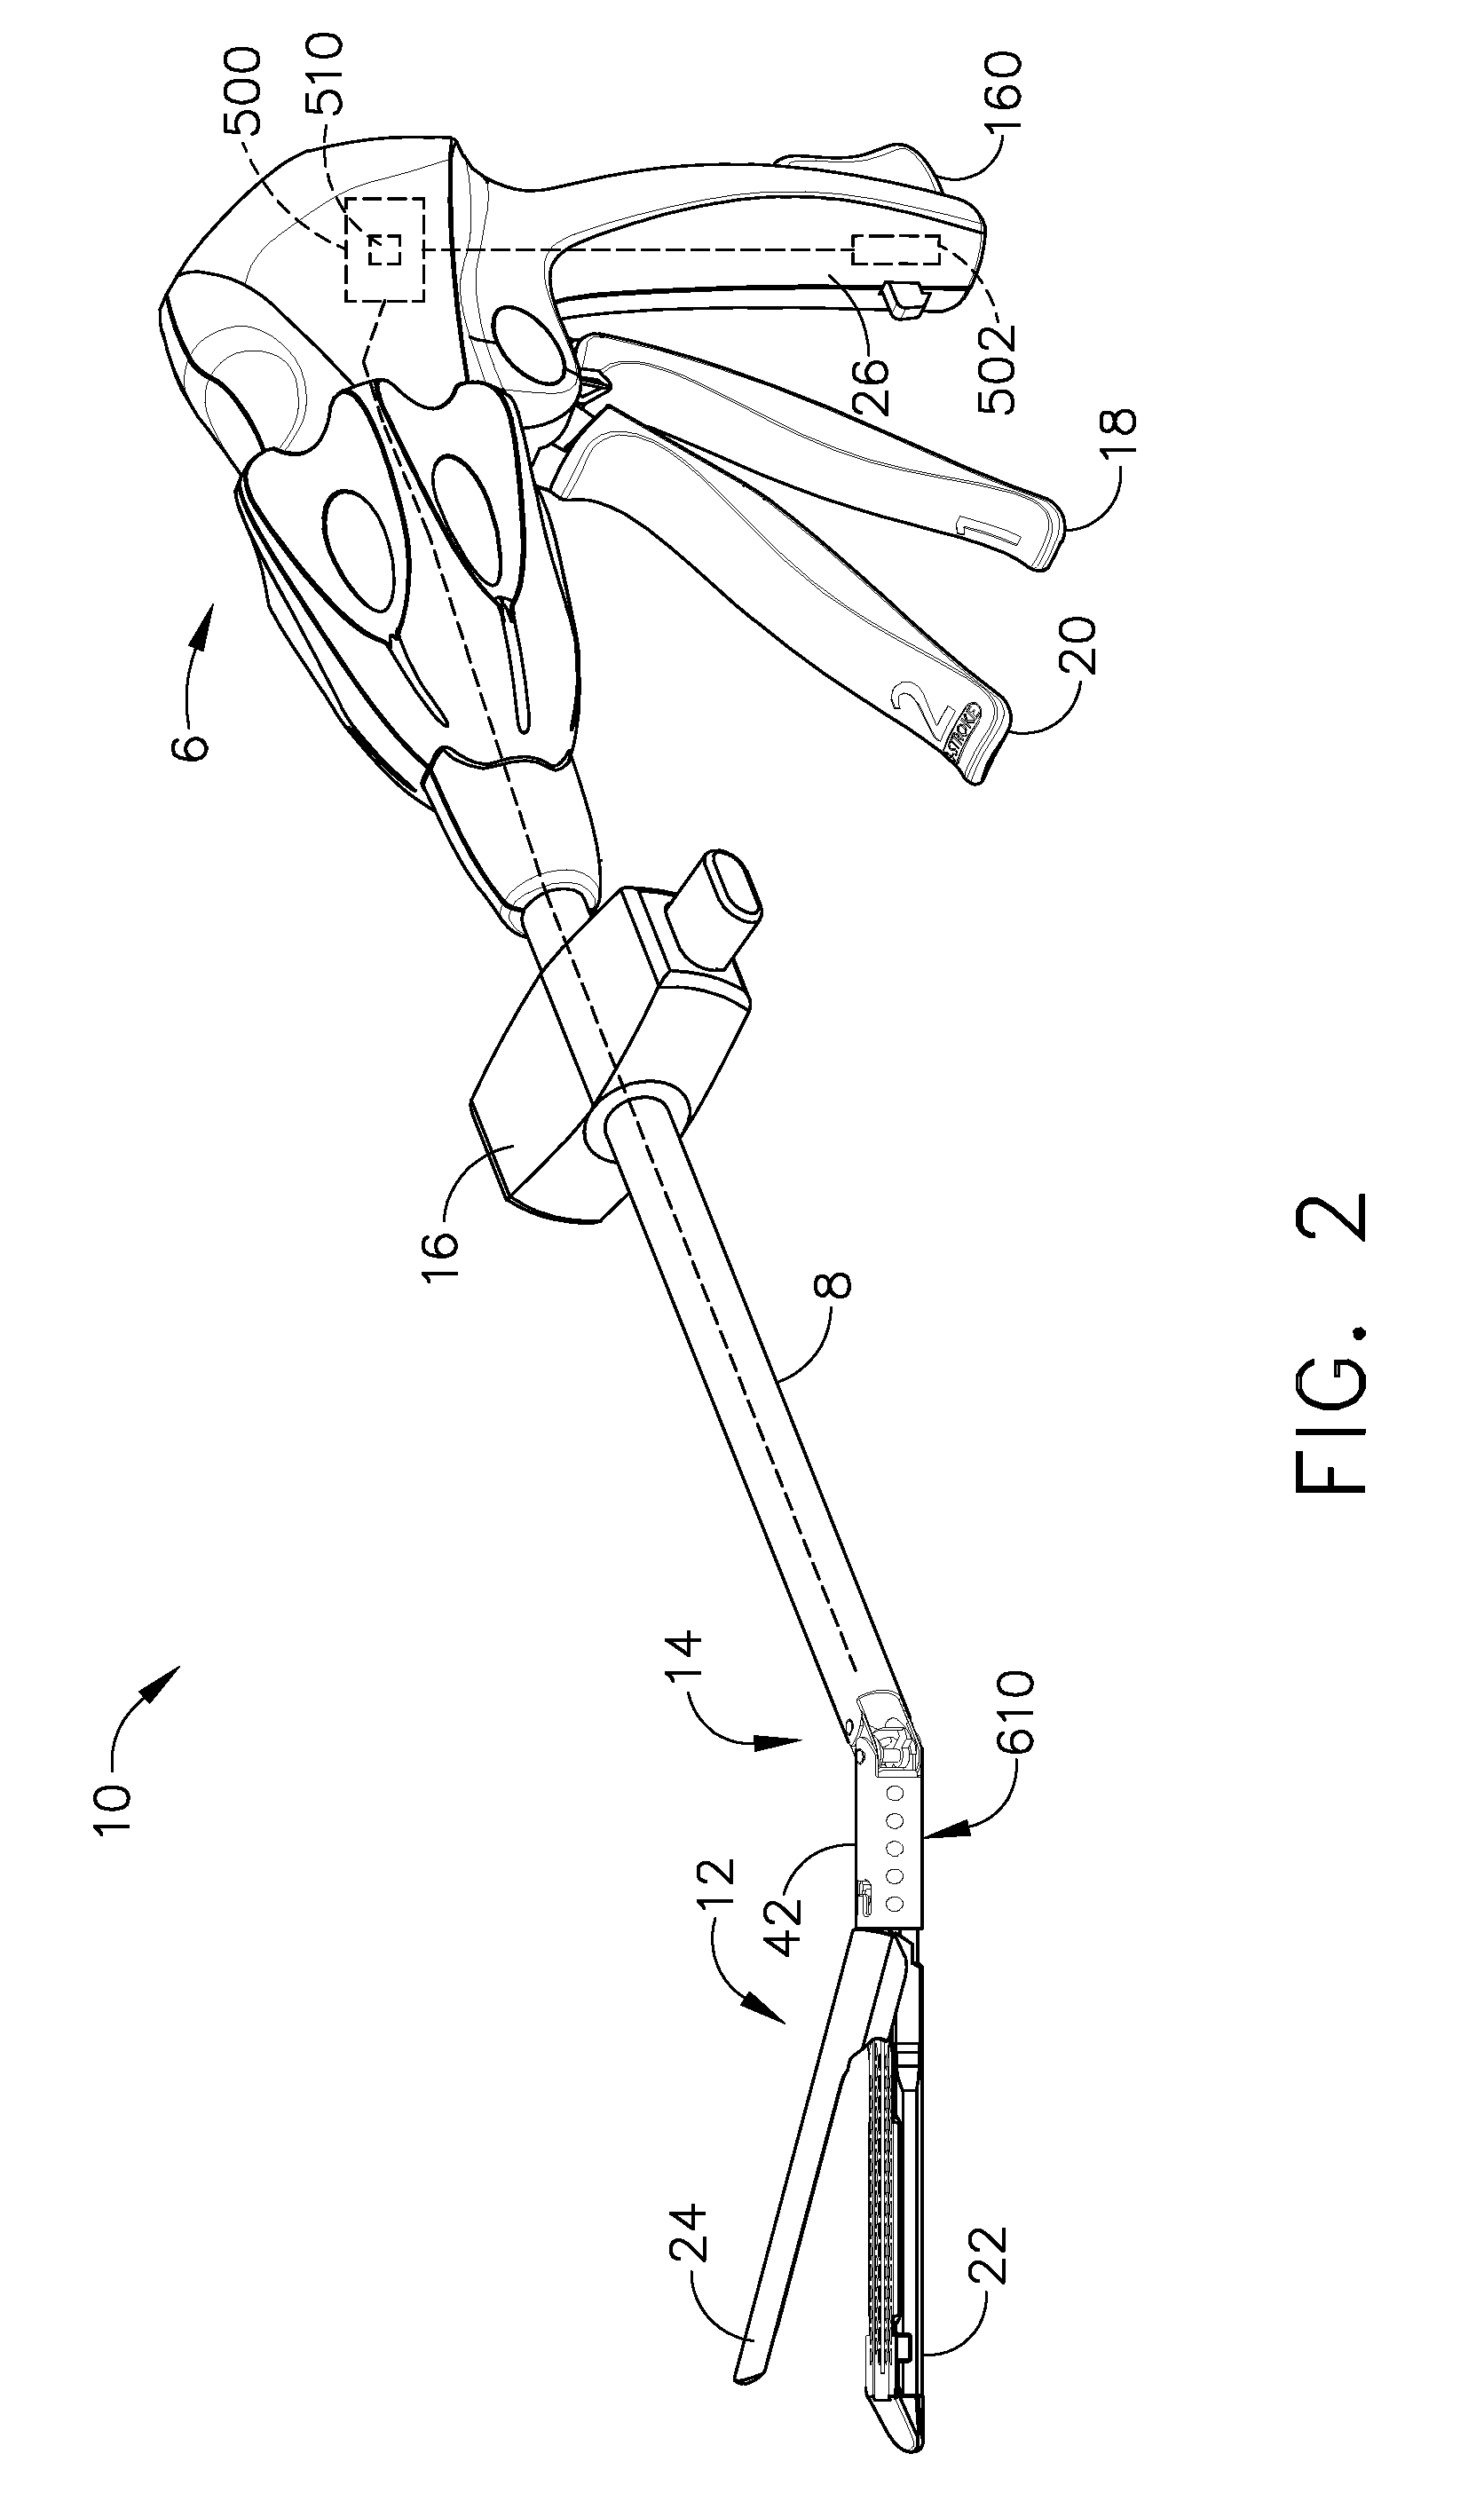 Surgical instrument with apparatus for measuring elapsed time between actions